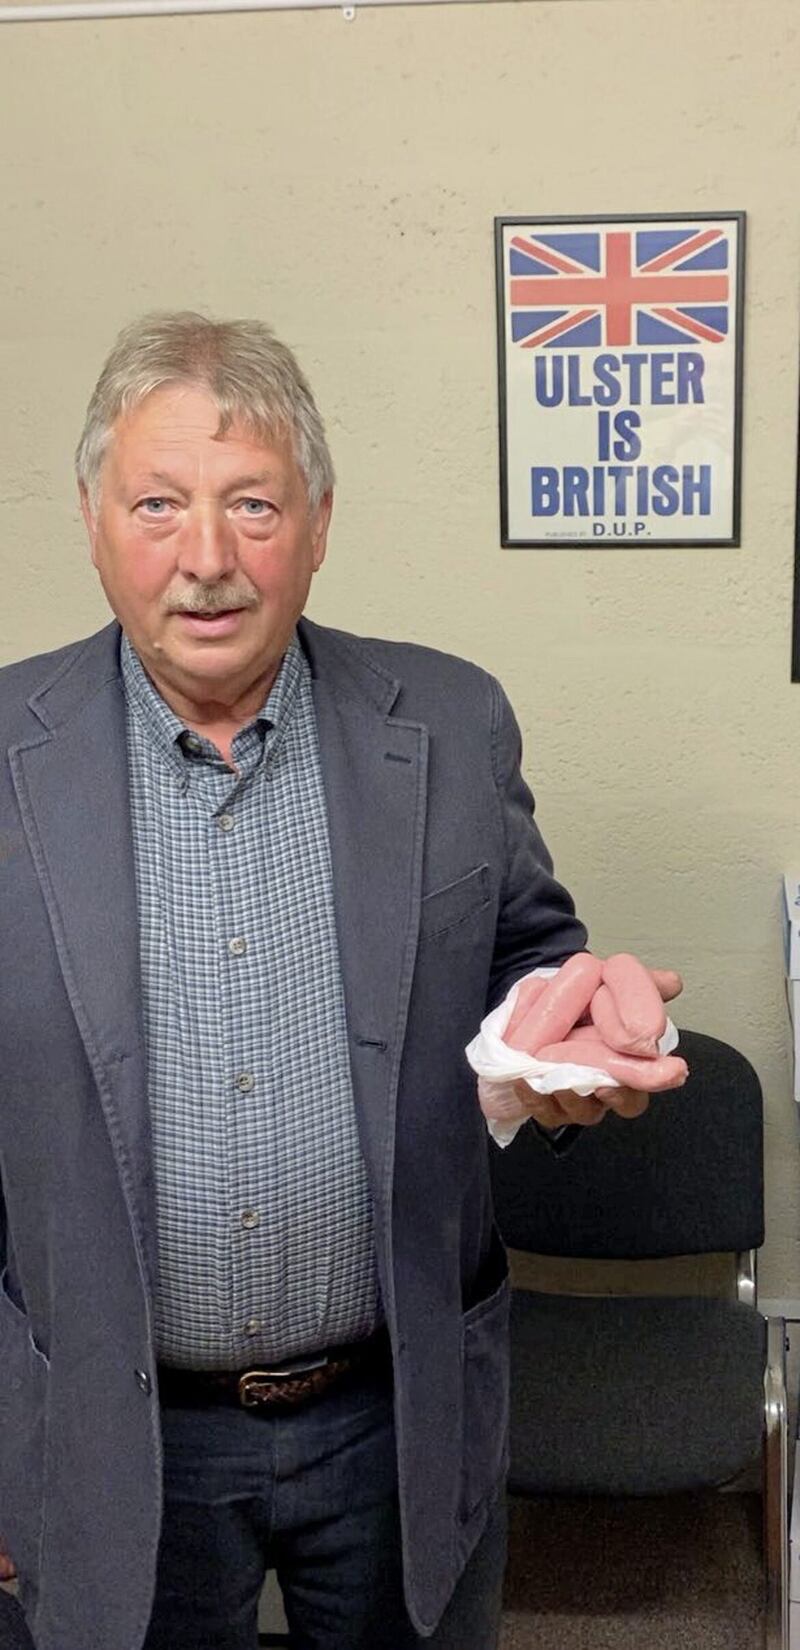 DUP MP Sammy Wilson tweeted a picture of himself holding sausages in 2021, claiming &quot;chilled British sausages are a threat to the peace process&quot; and calling for the &quot;farcical&quot; Northern Ireland Protocol to go 